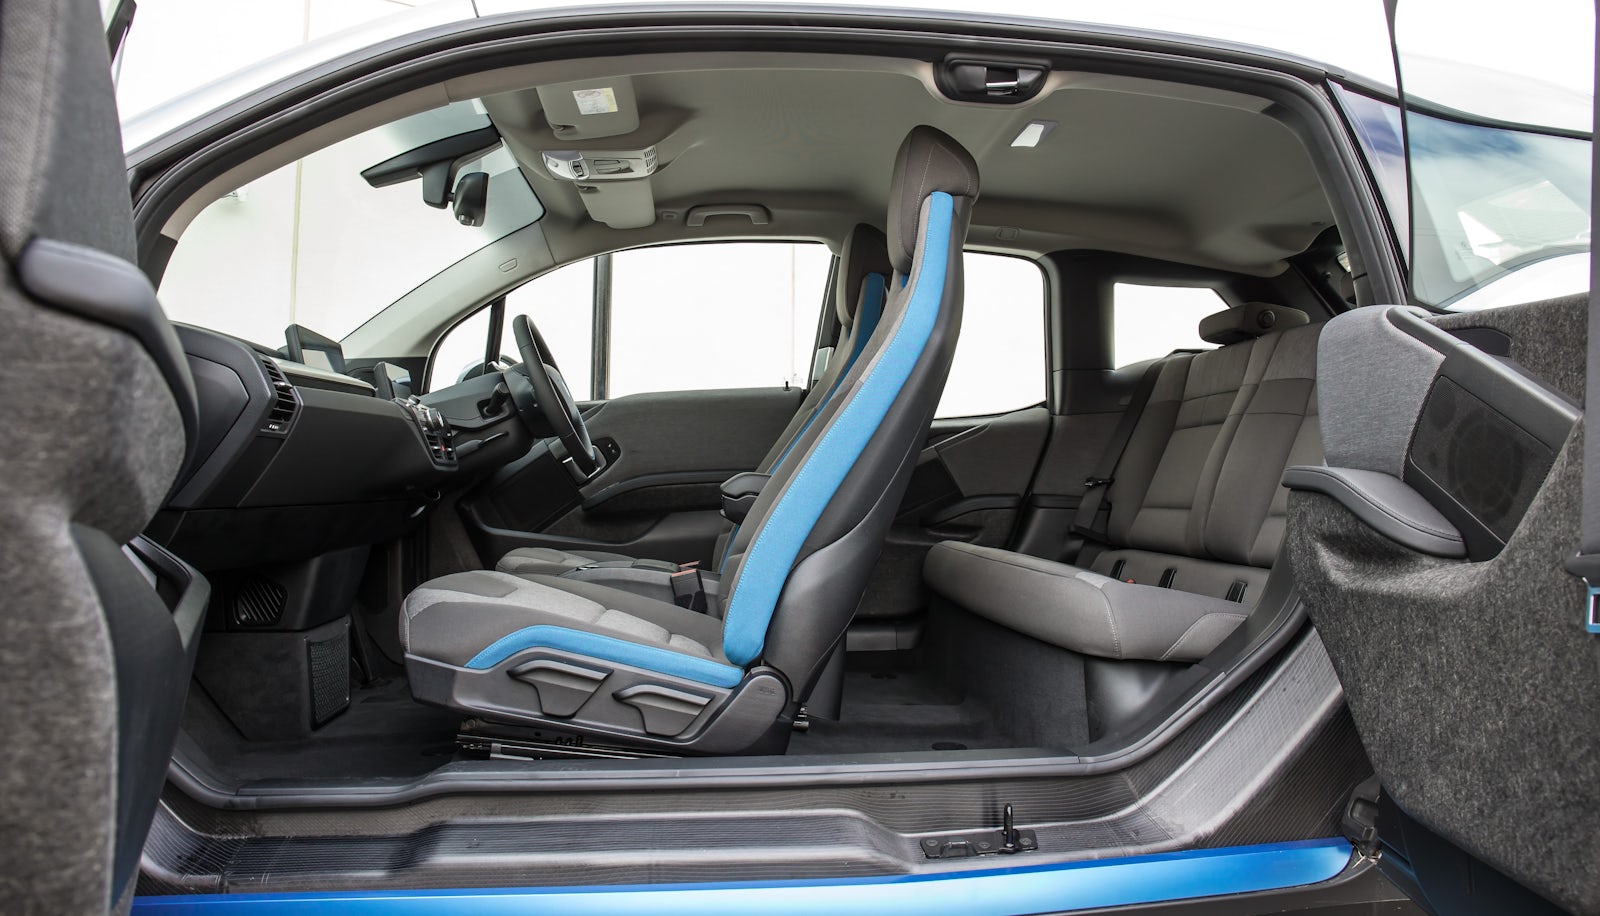 BMW i3 sizes and dimensions guide & legroom | carwow